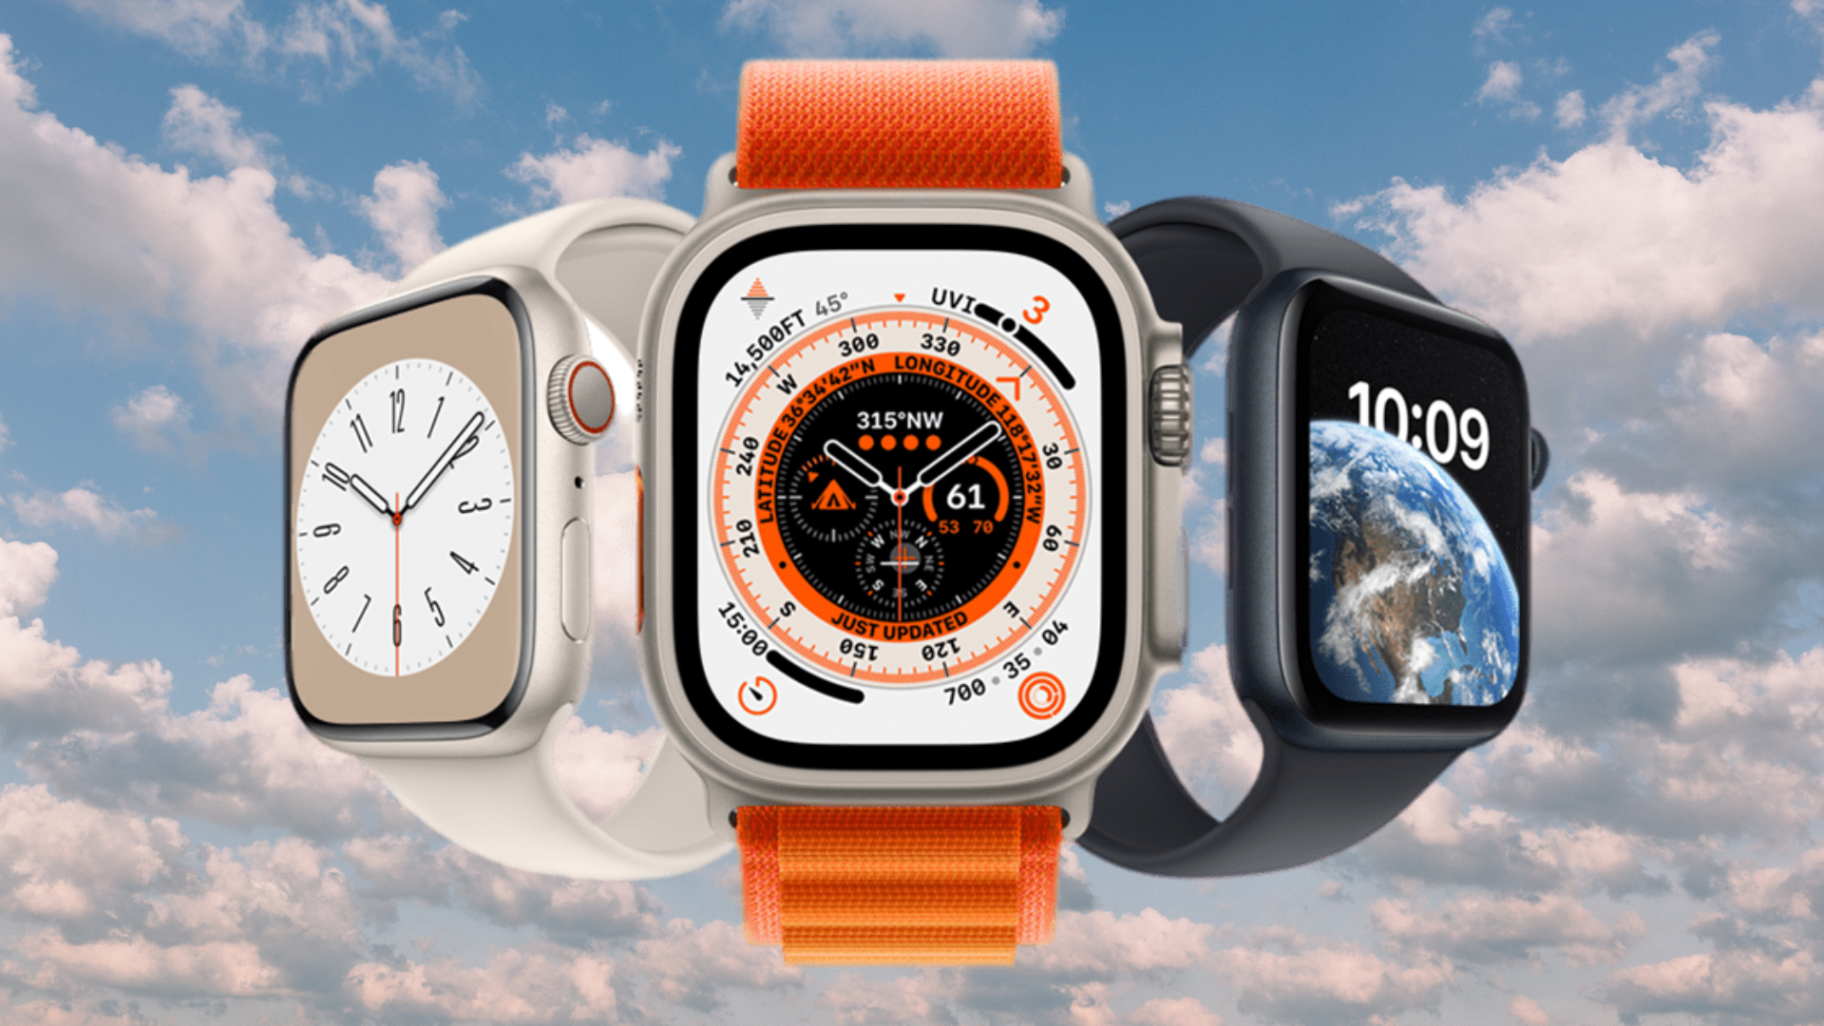 apple watch face design Bulan 5 The  Best Apple Watch Faces in  - IGN